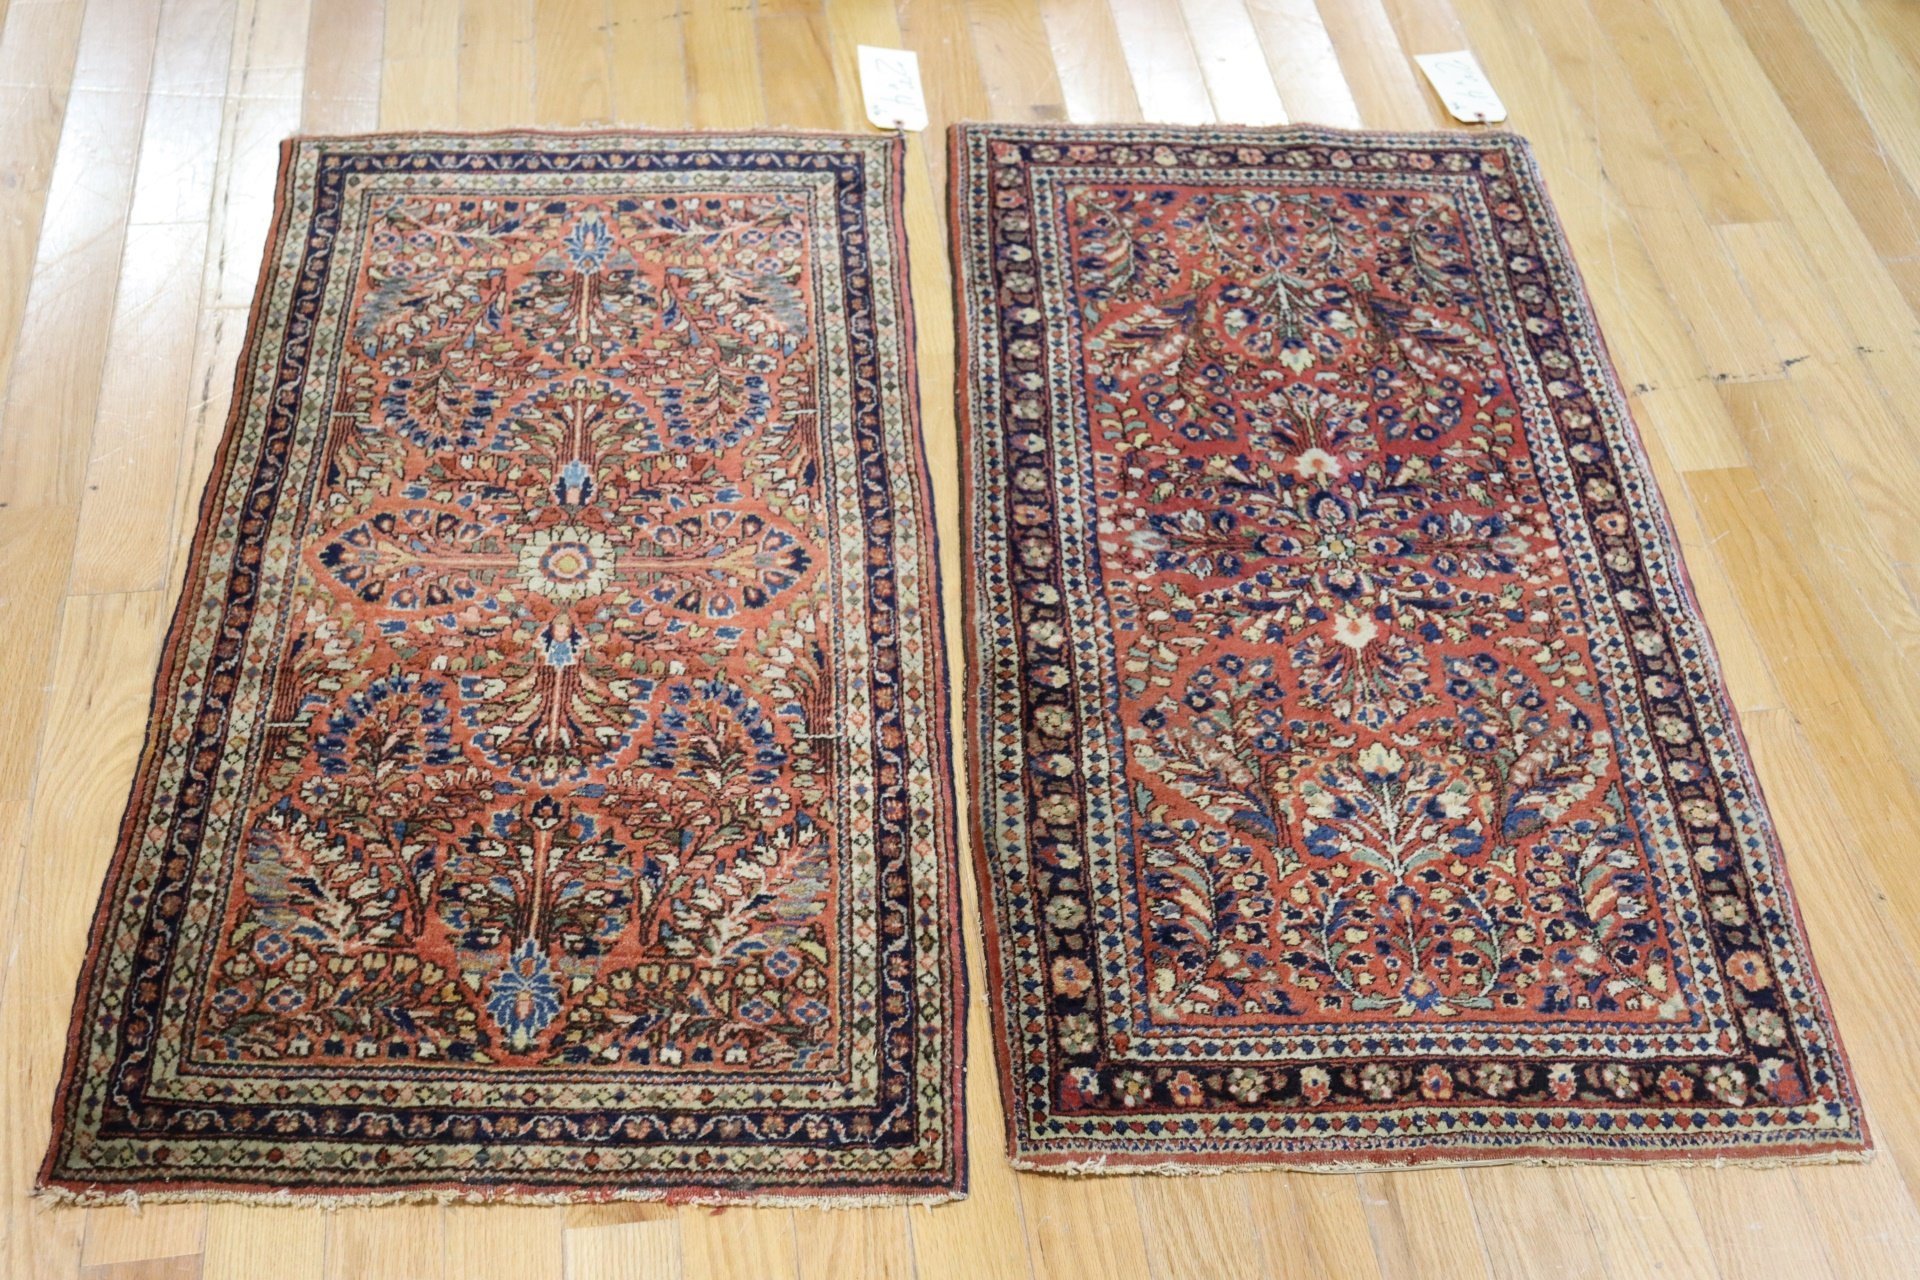 2 ANTIQUE AND FINELY HAND WOVEN 3b9720